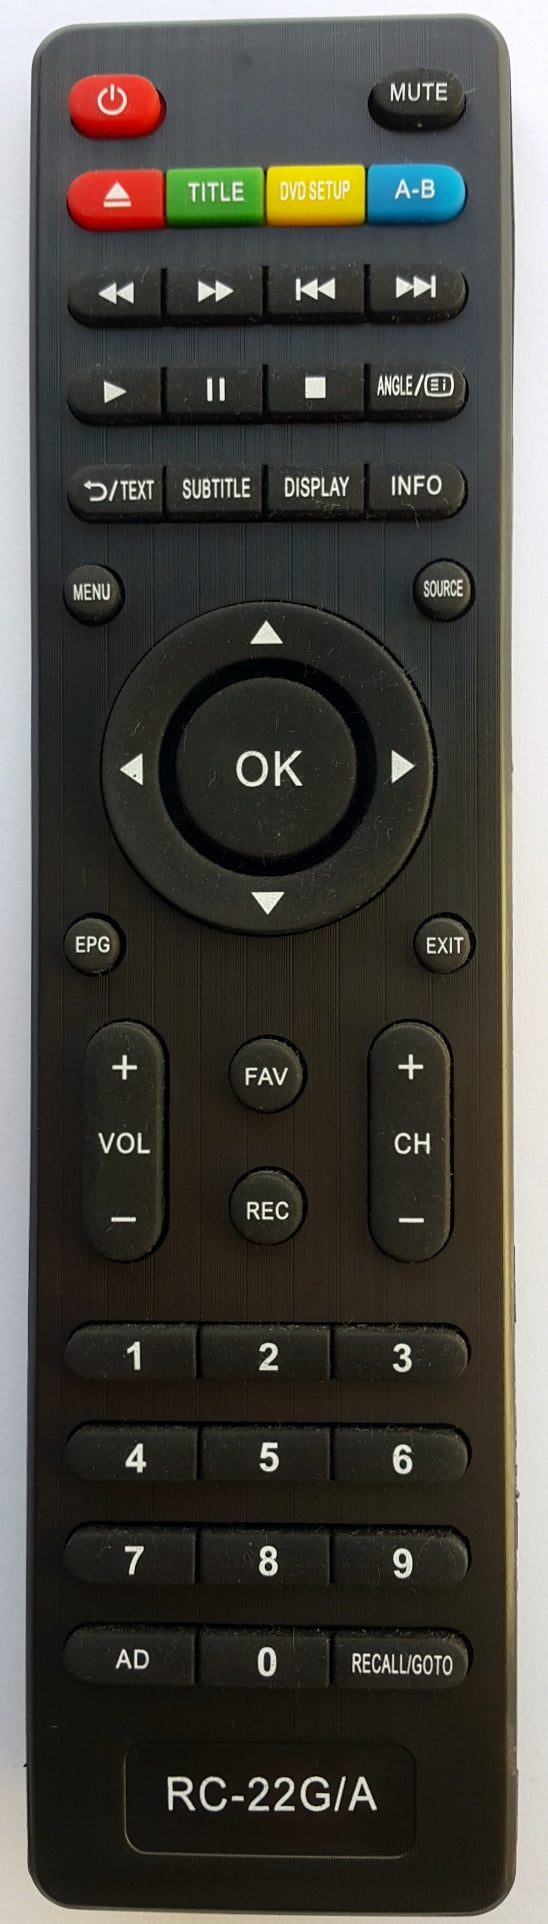 GRUNDIG REPLACEMENT REMOTE CONTROL -  G24FLED/A LCD TV - Remote Control Warehouse